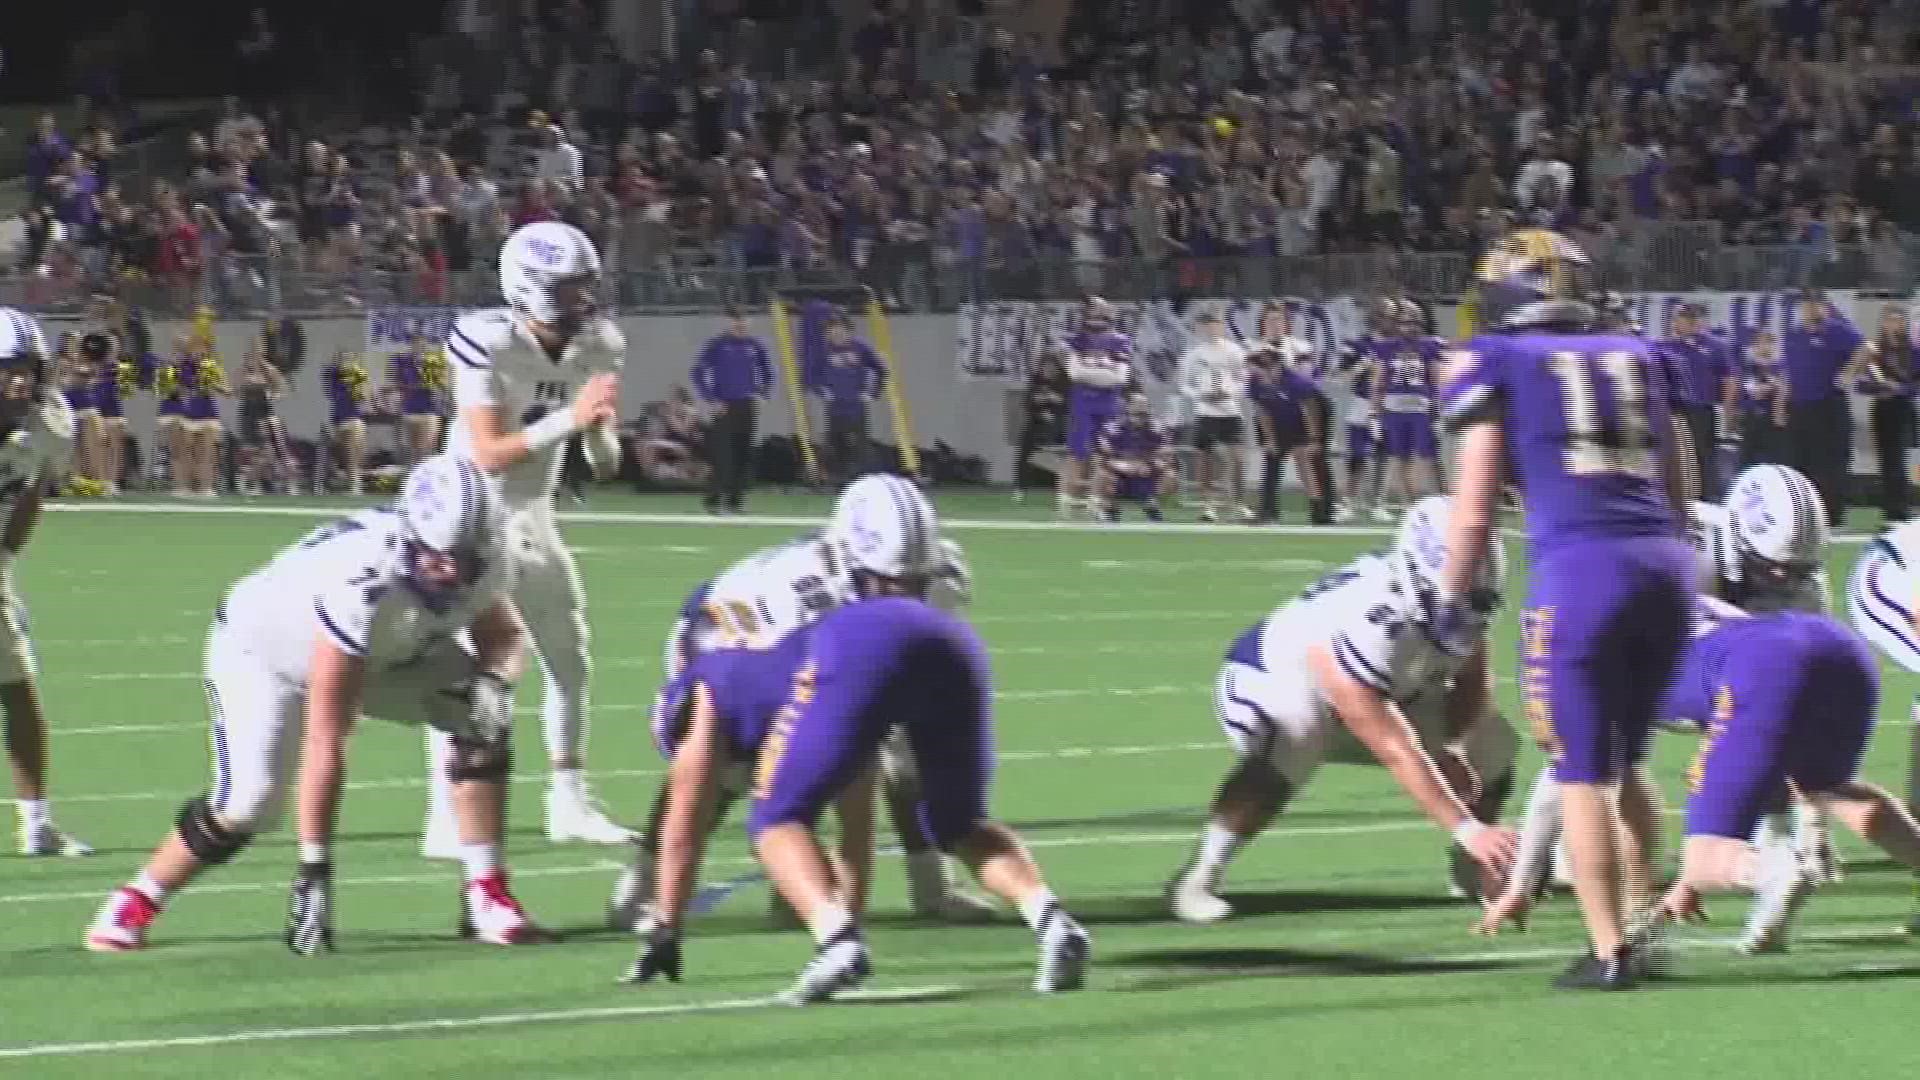 Port Neches-Groves topples Liberty Hill 42-14 in State Semifinals